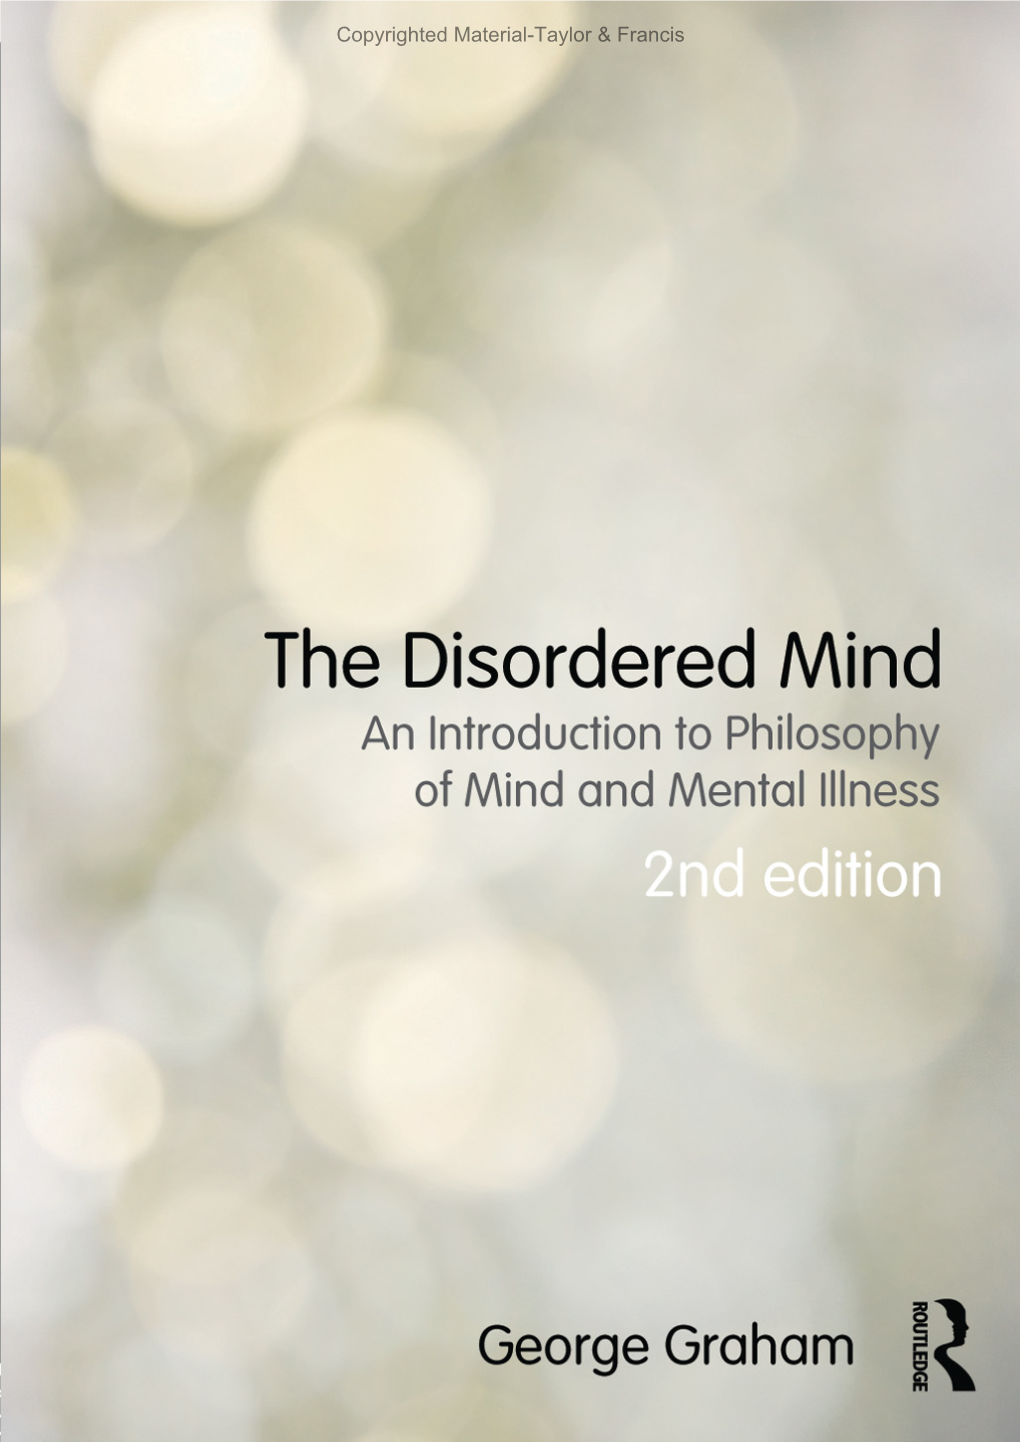 An Introduction to Philosophy of Mind and Mental Illness